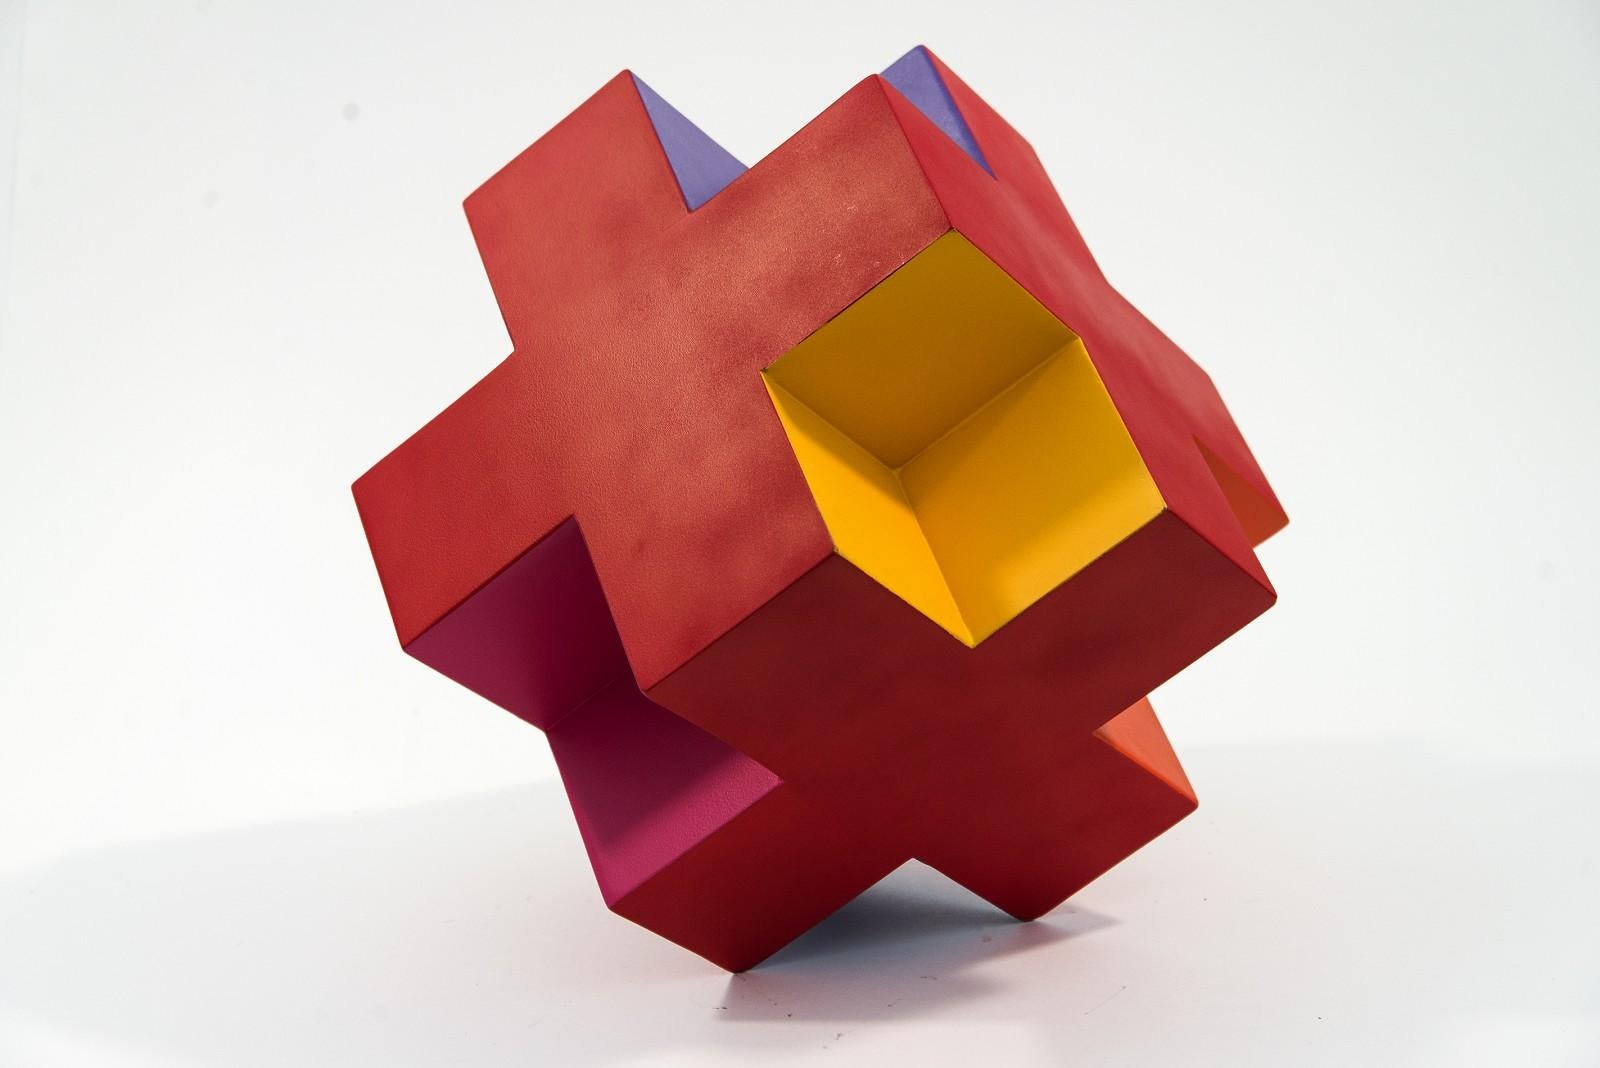 Quebec artist Phillipe Pallafray has used several of the colours of the spectrum—yellow, orange, pink, red and violet to create a playful and modern rubik's cube-like sculpture. Pallafray uses industrial components—steel and stainless steel that he